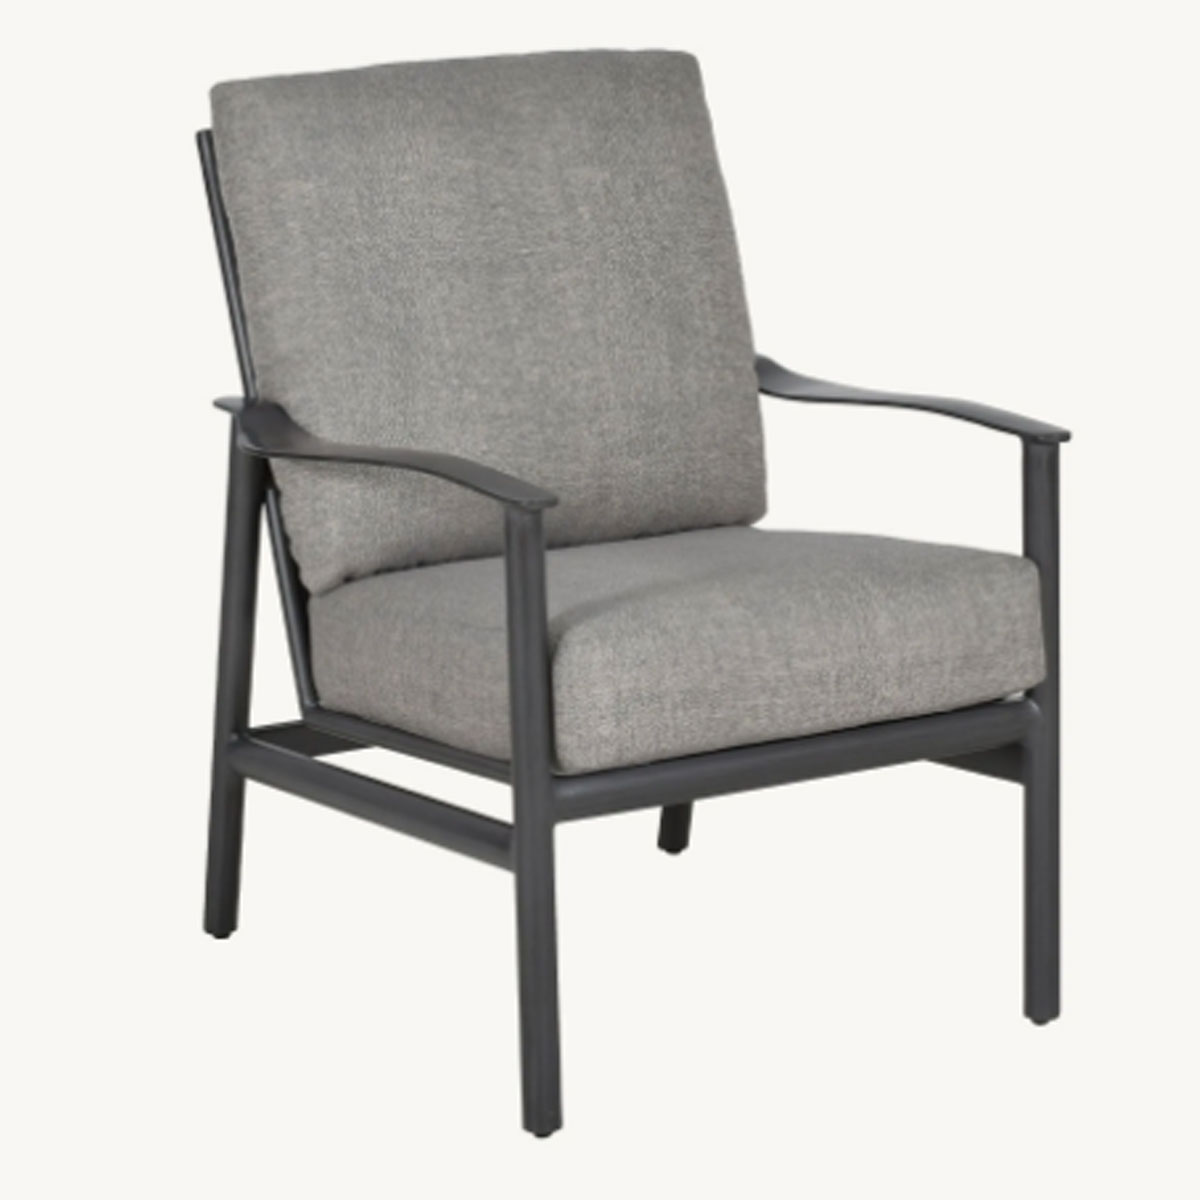 Castelle Barbados Cushion Dining Chair